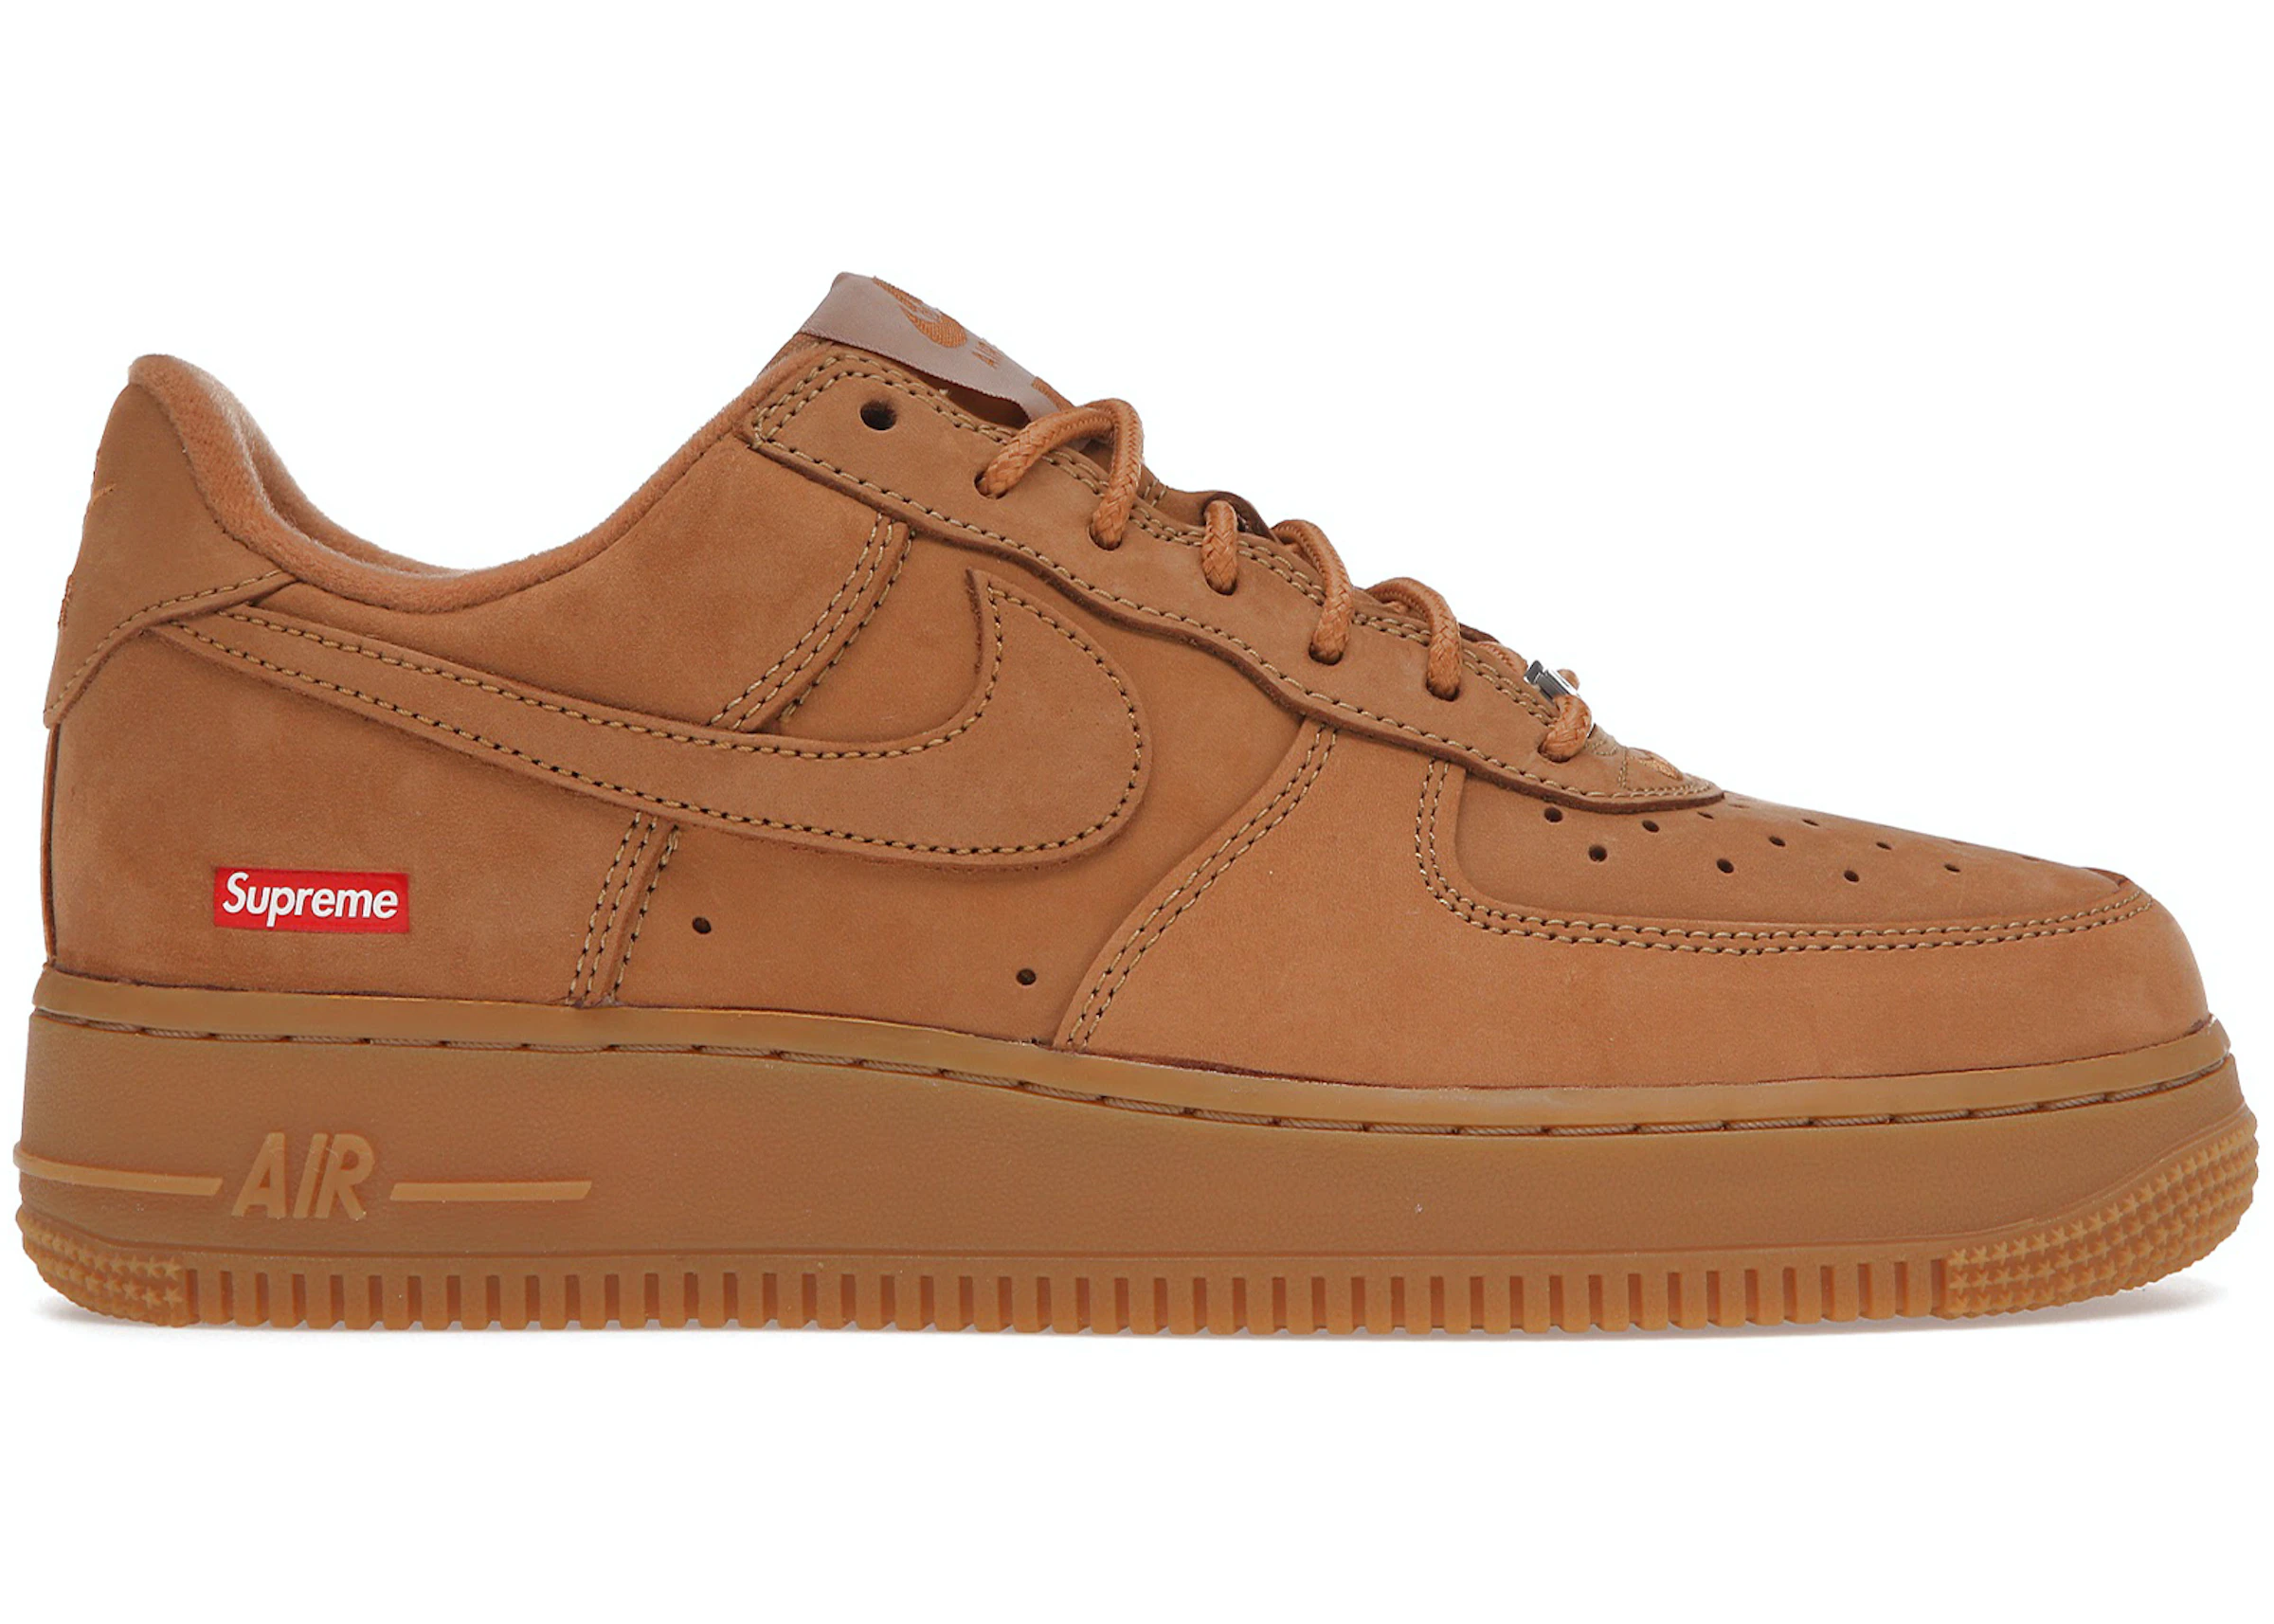 meteorito Lengua macarrónica Distante Nike Air Force 1 Low SP Supreme Wheat - DN1555-200 - ES